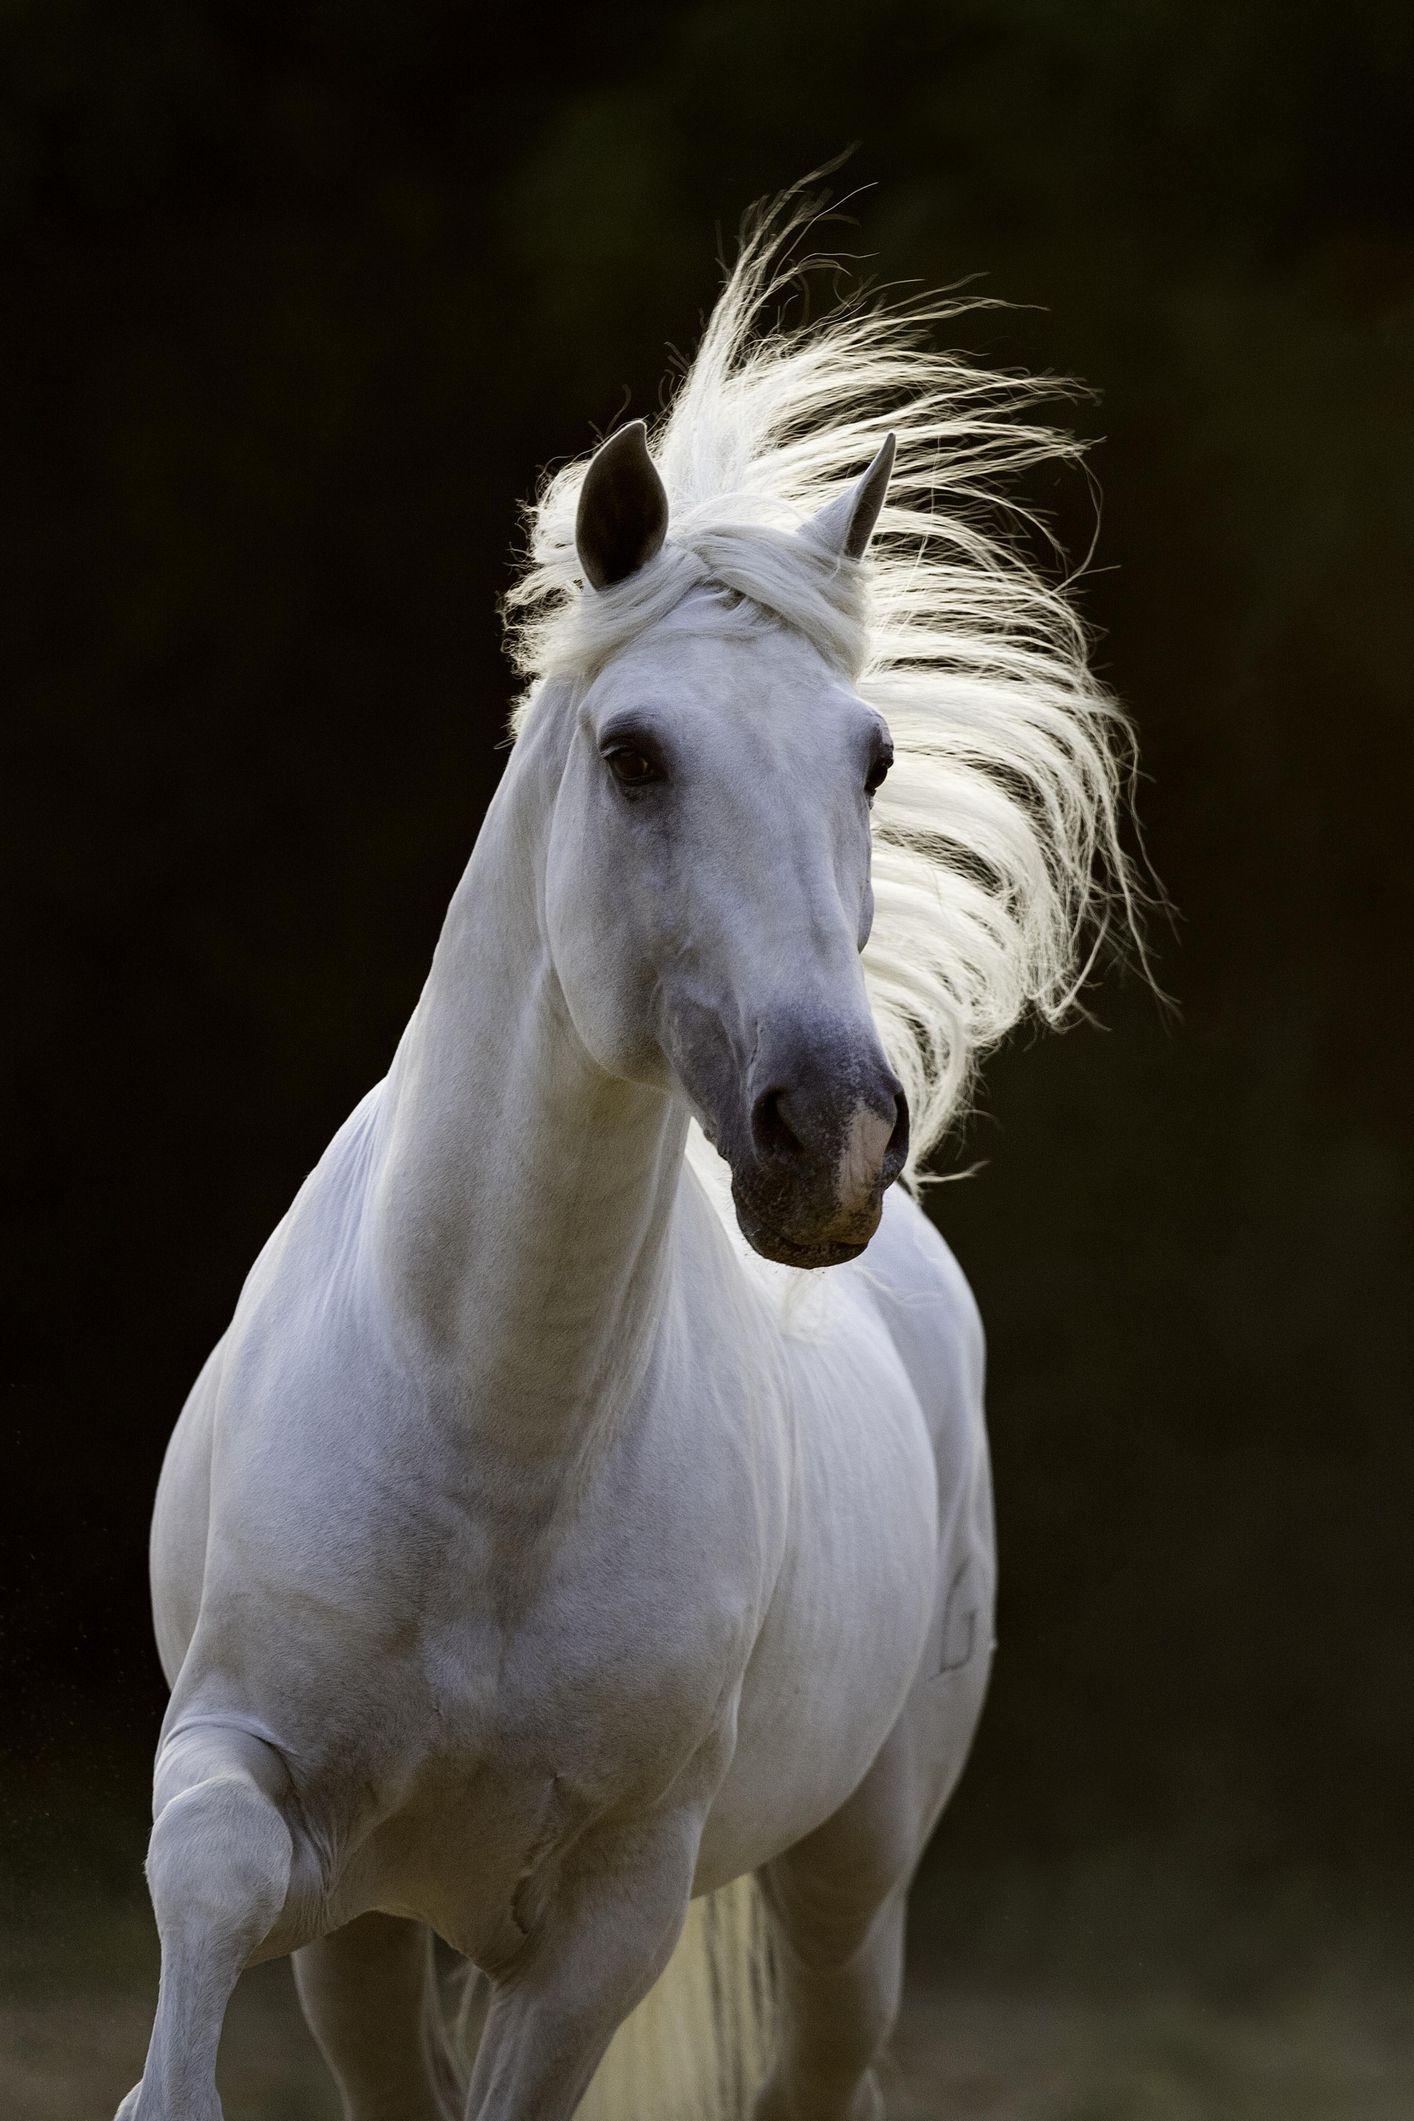 12 Horse Breeds - Different Horse